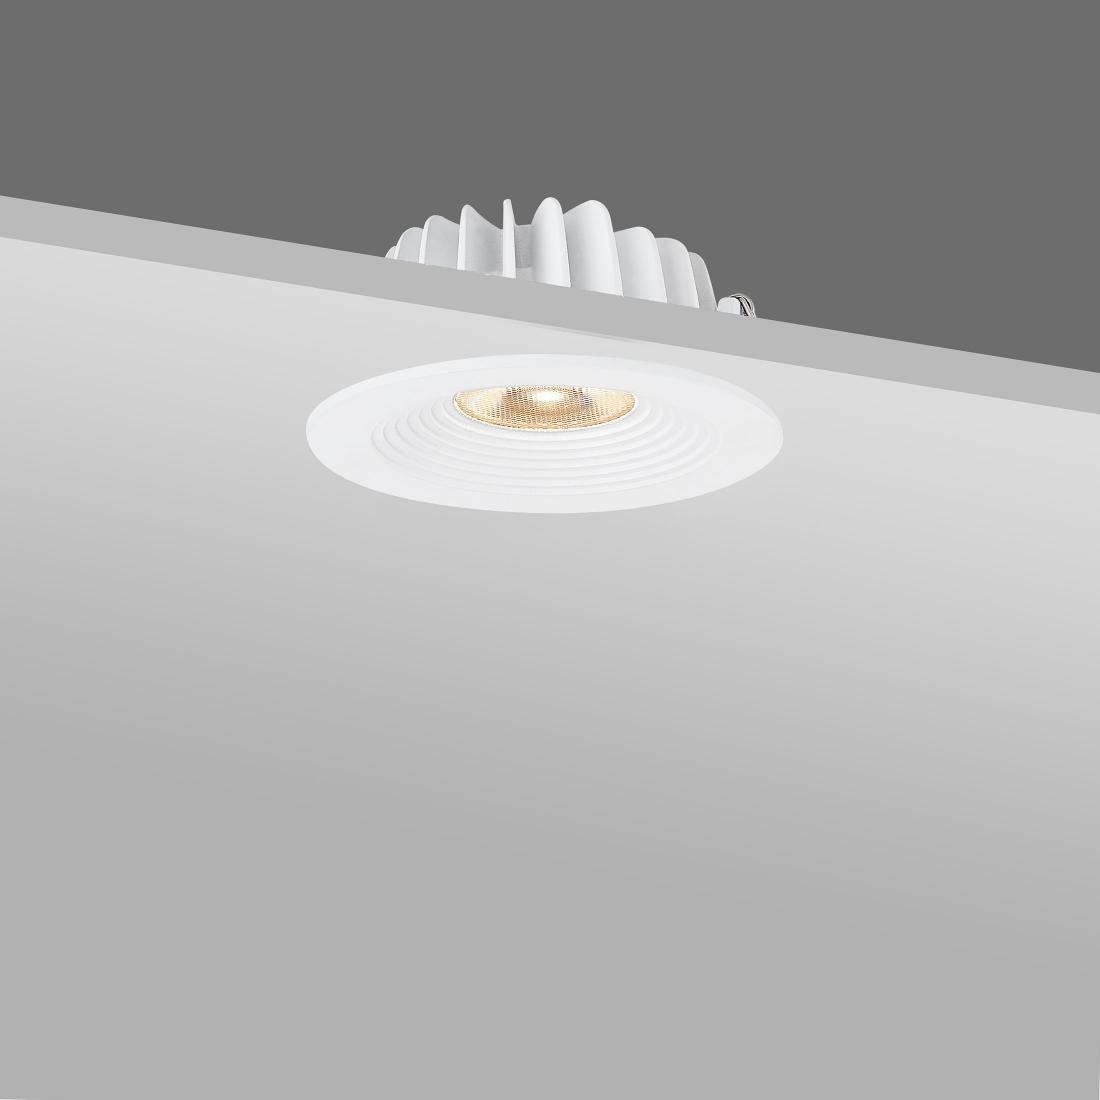 Fixed Recessed Spot light